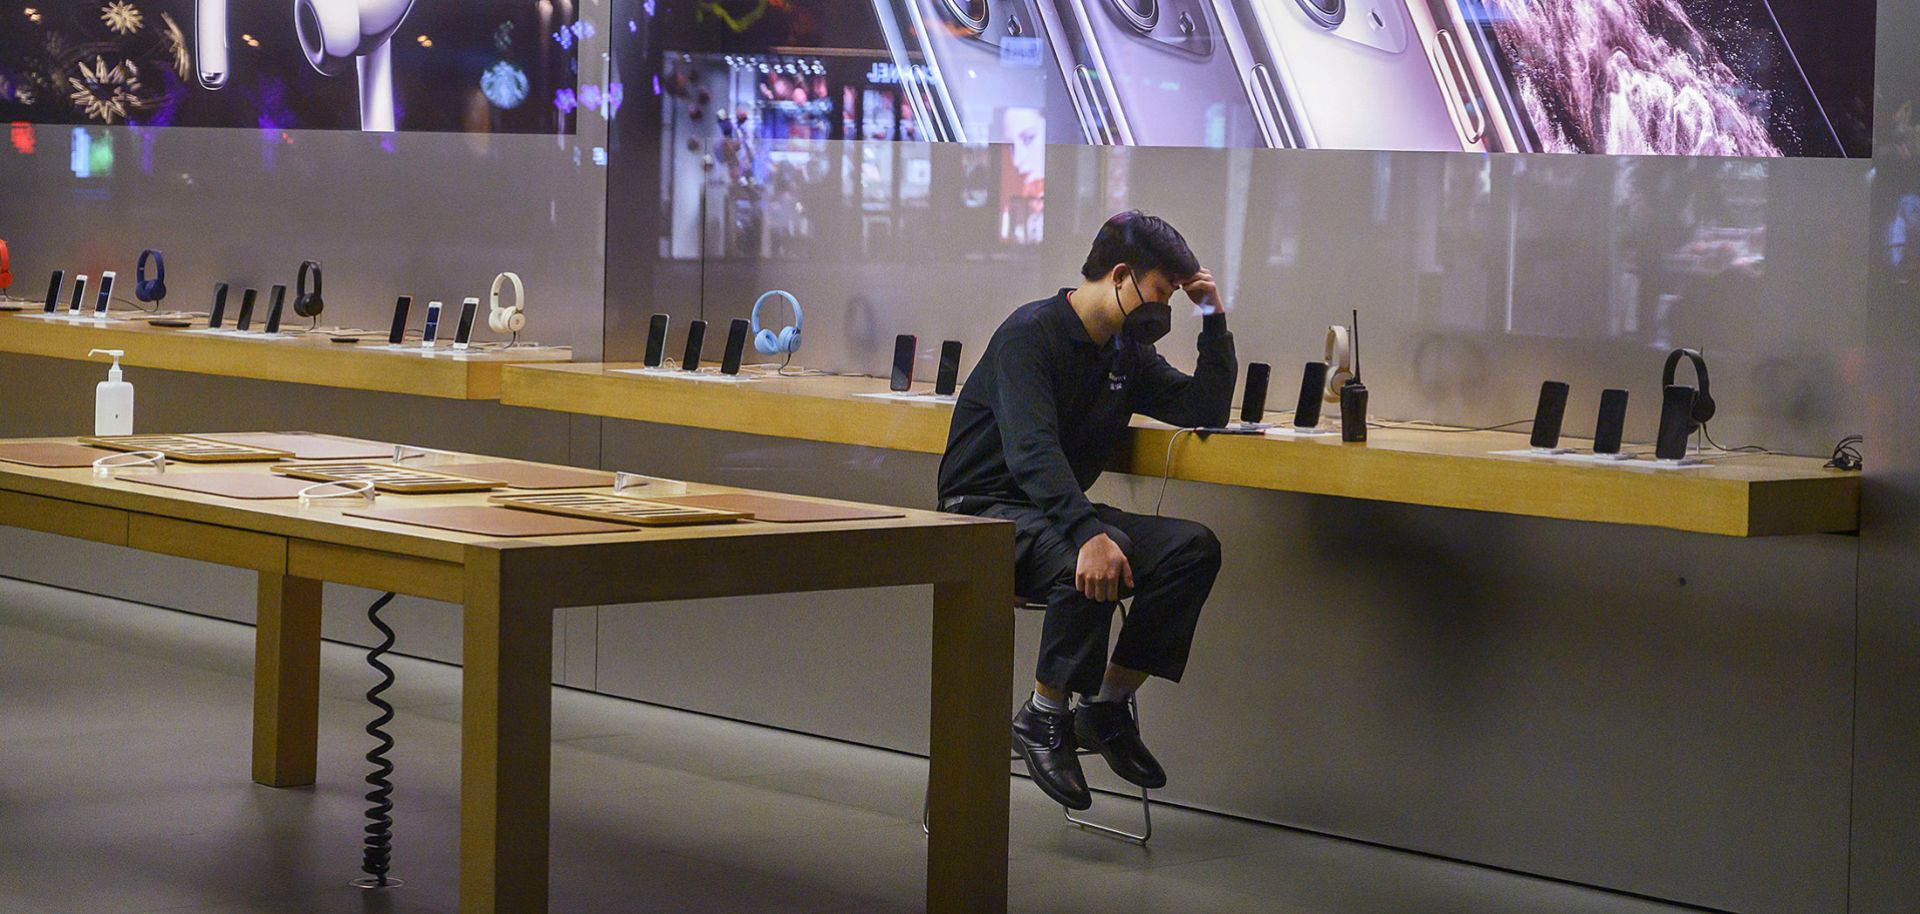 An employee sits in the showroom of an Apple store in Beijing after it closed for the day on Feb. 1, 2020.